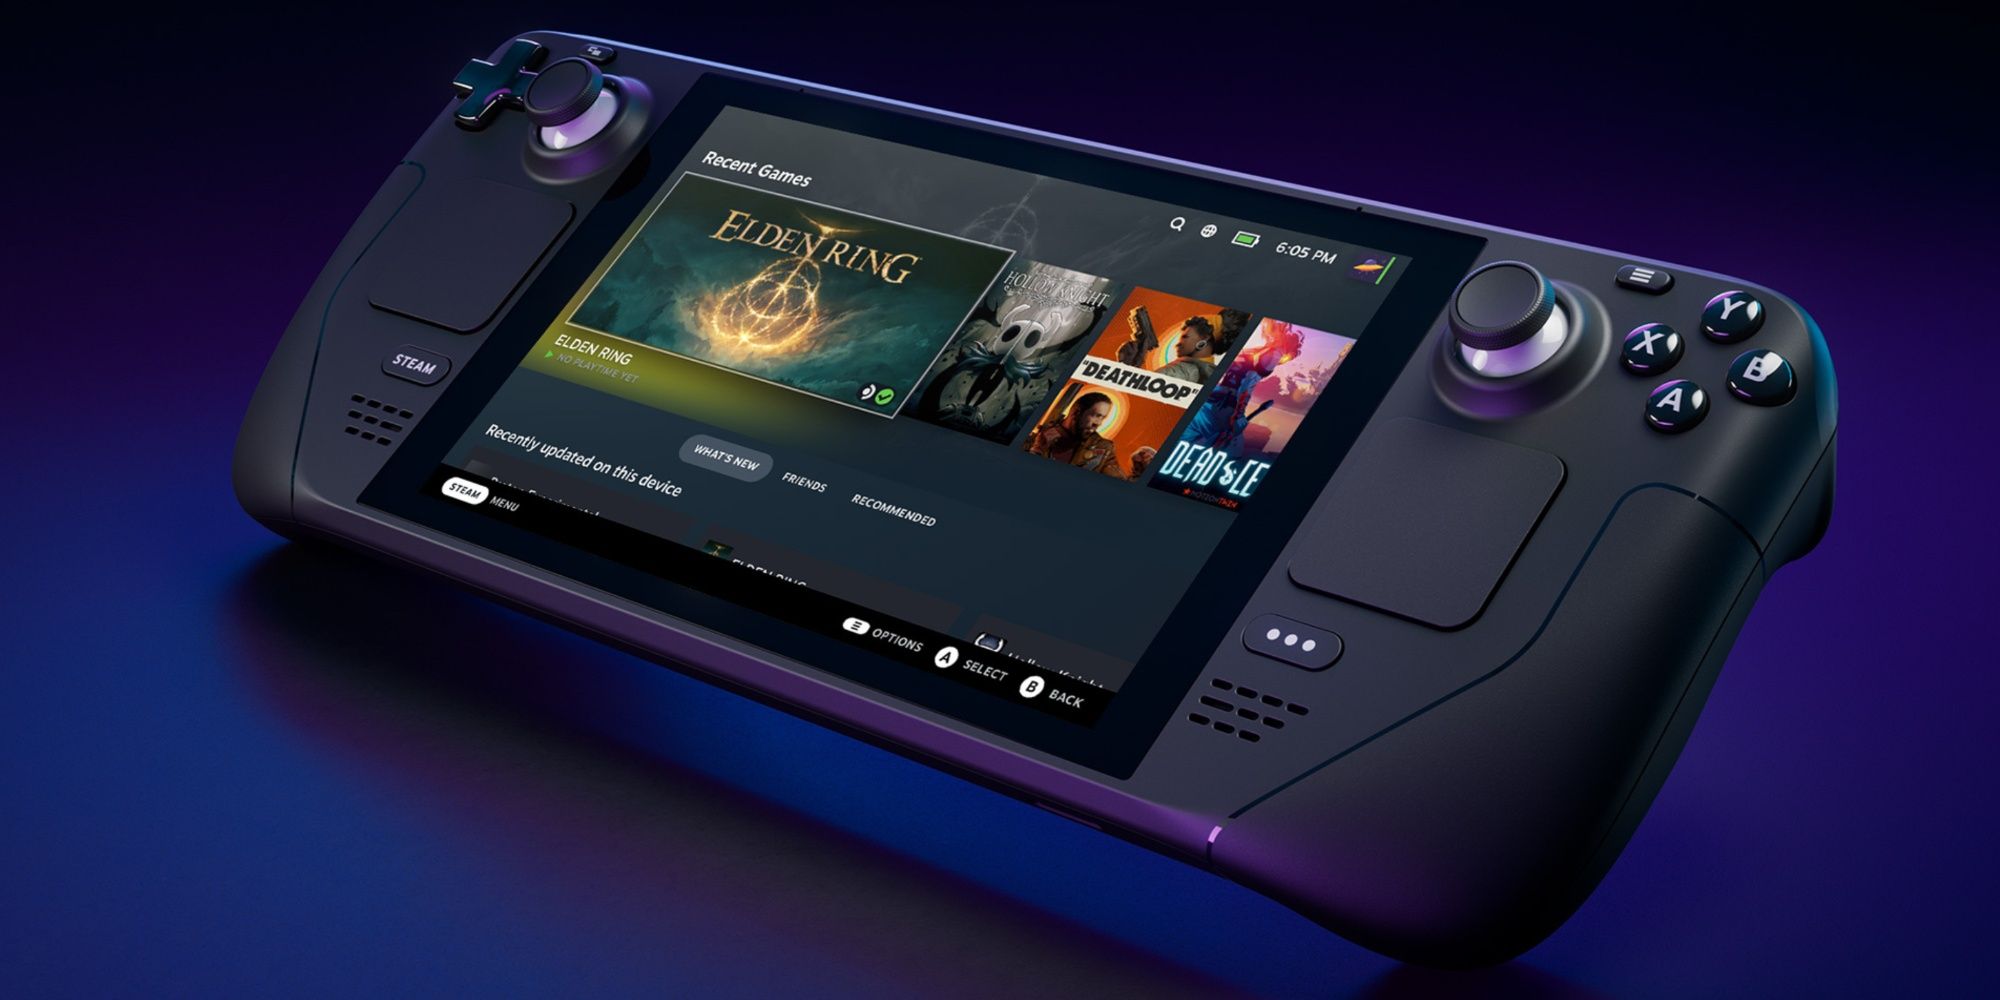 Tilted angle of Steam Deck console on its home screen